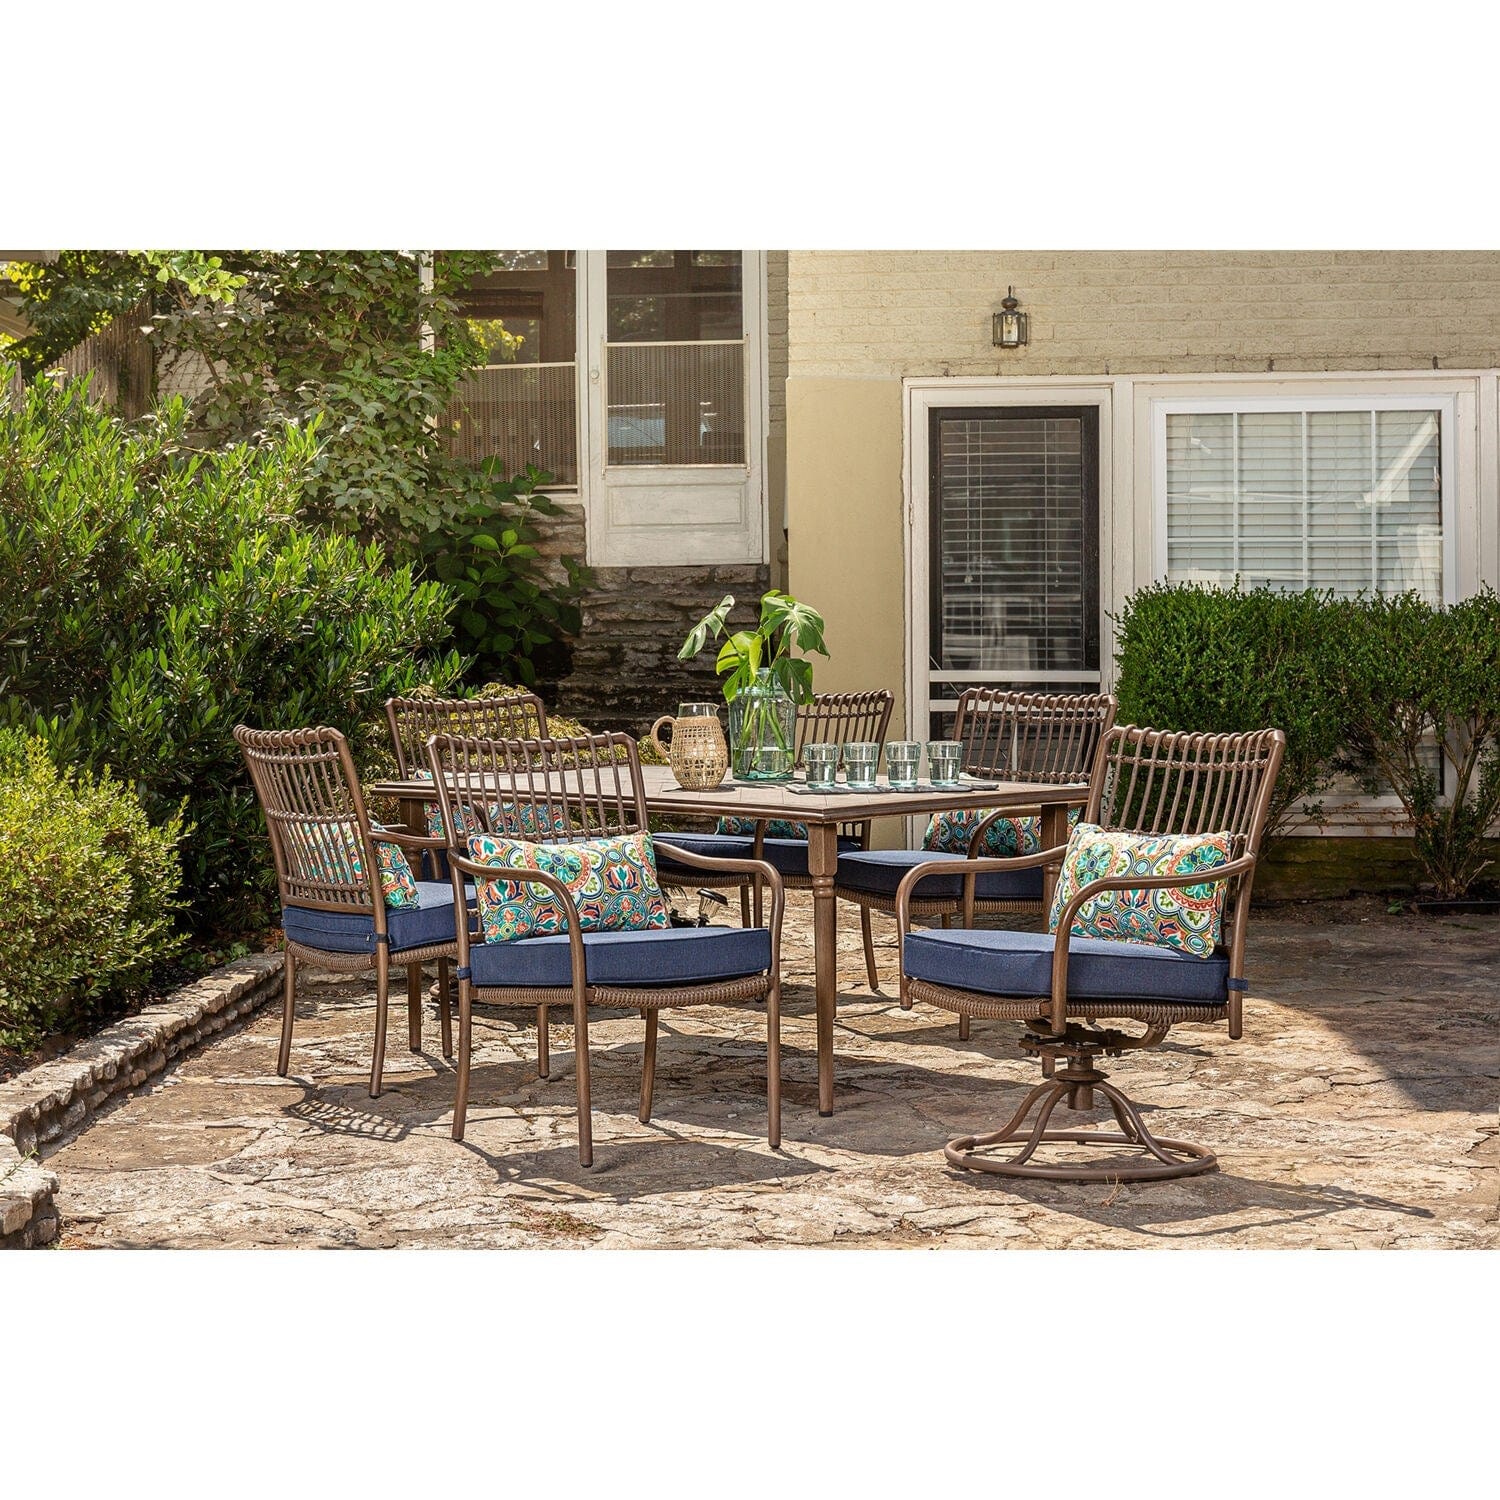 Hanover Outdoor Dining Set Hanover - Summerland7pc Aluminum Frame: 4 Dining Chairs, 2 Swivel Chairs, and 68"x40" Rect. Table |  	Navy/Alum | SUMDN7PCSW2-NVY